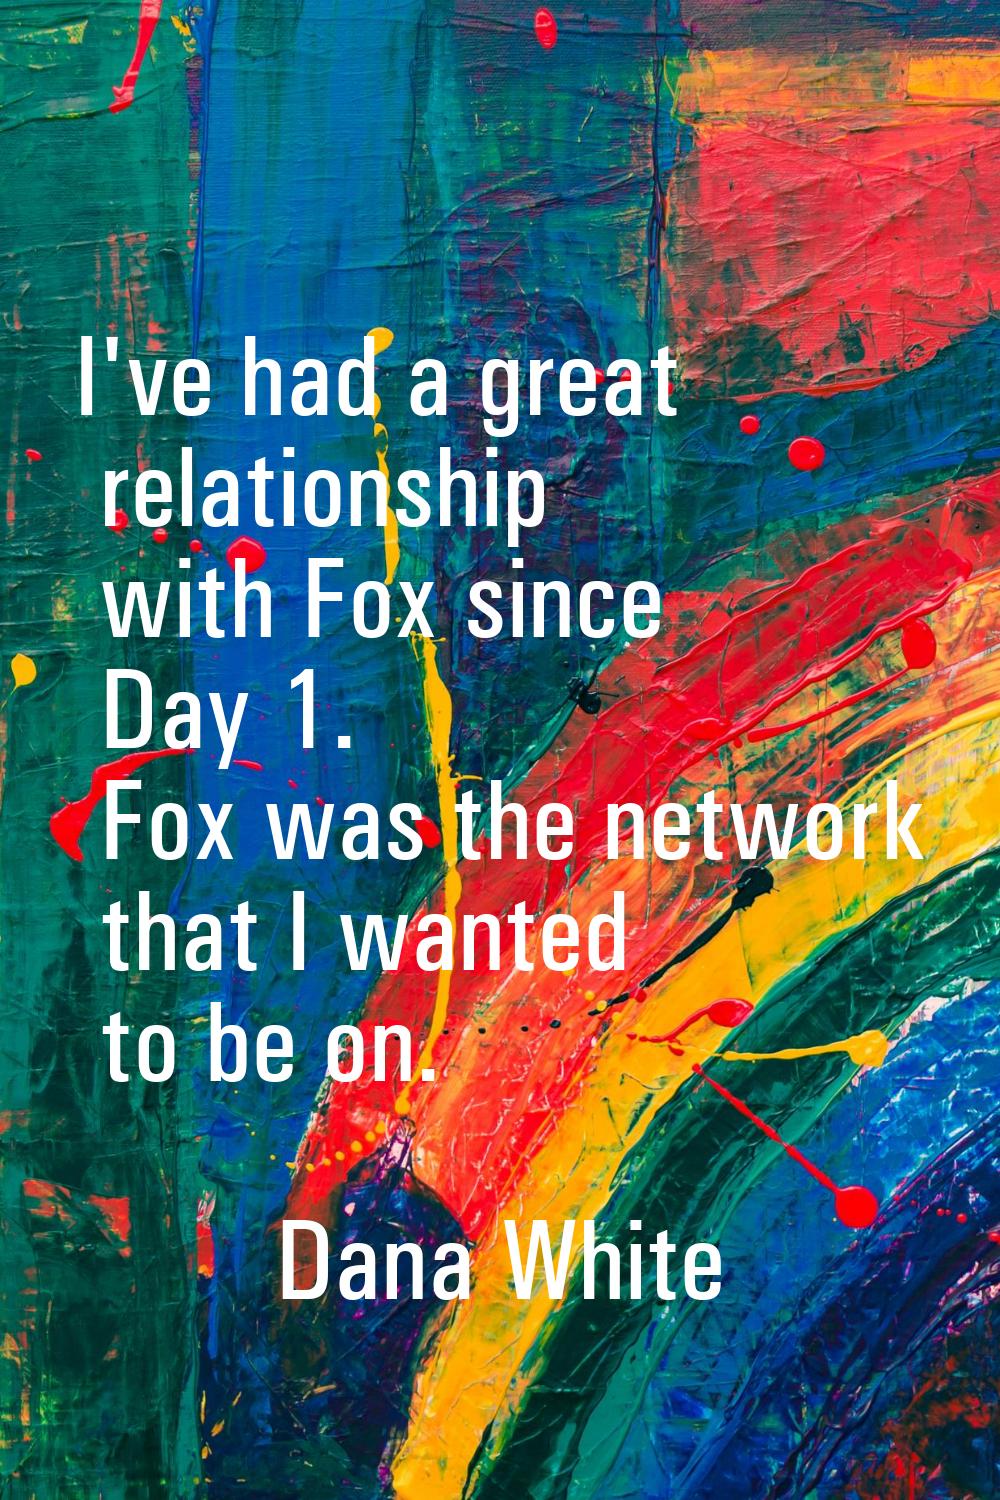 I've had a great relationship with Fox since Day 1. Fox was the network that I wanted to be on.